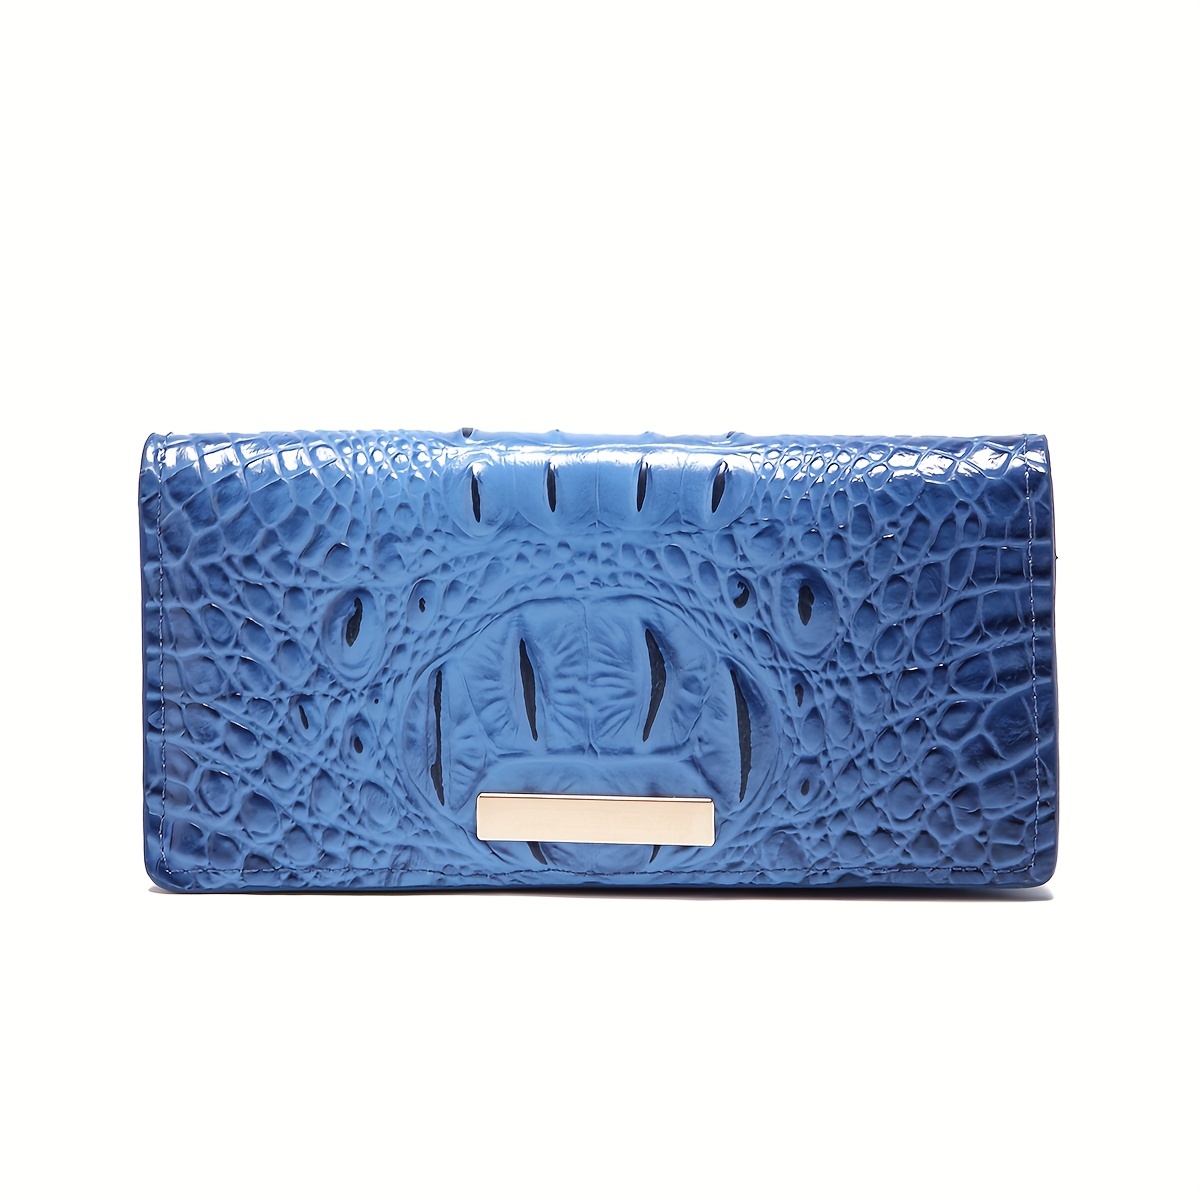 Trendy Crocodile Pattern Long Wallet Trendy Womens Clutch Coin Purse  Classic Textured Credit Card Case, Find Great Deals Now